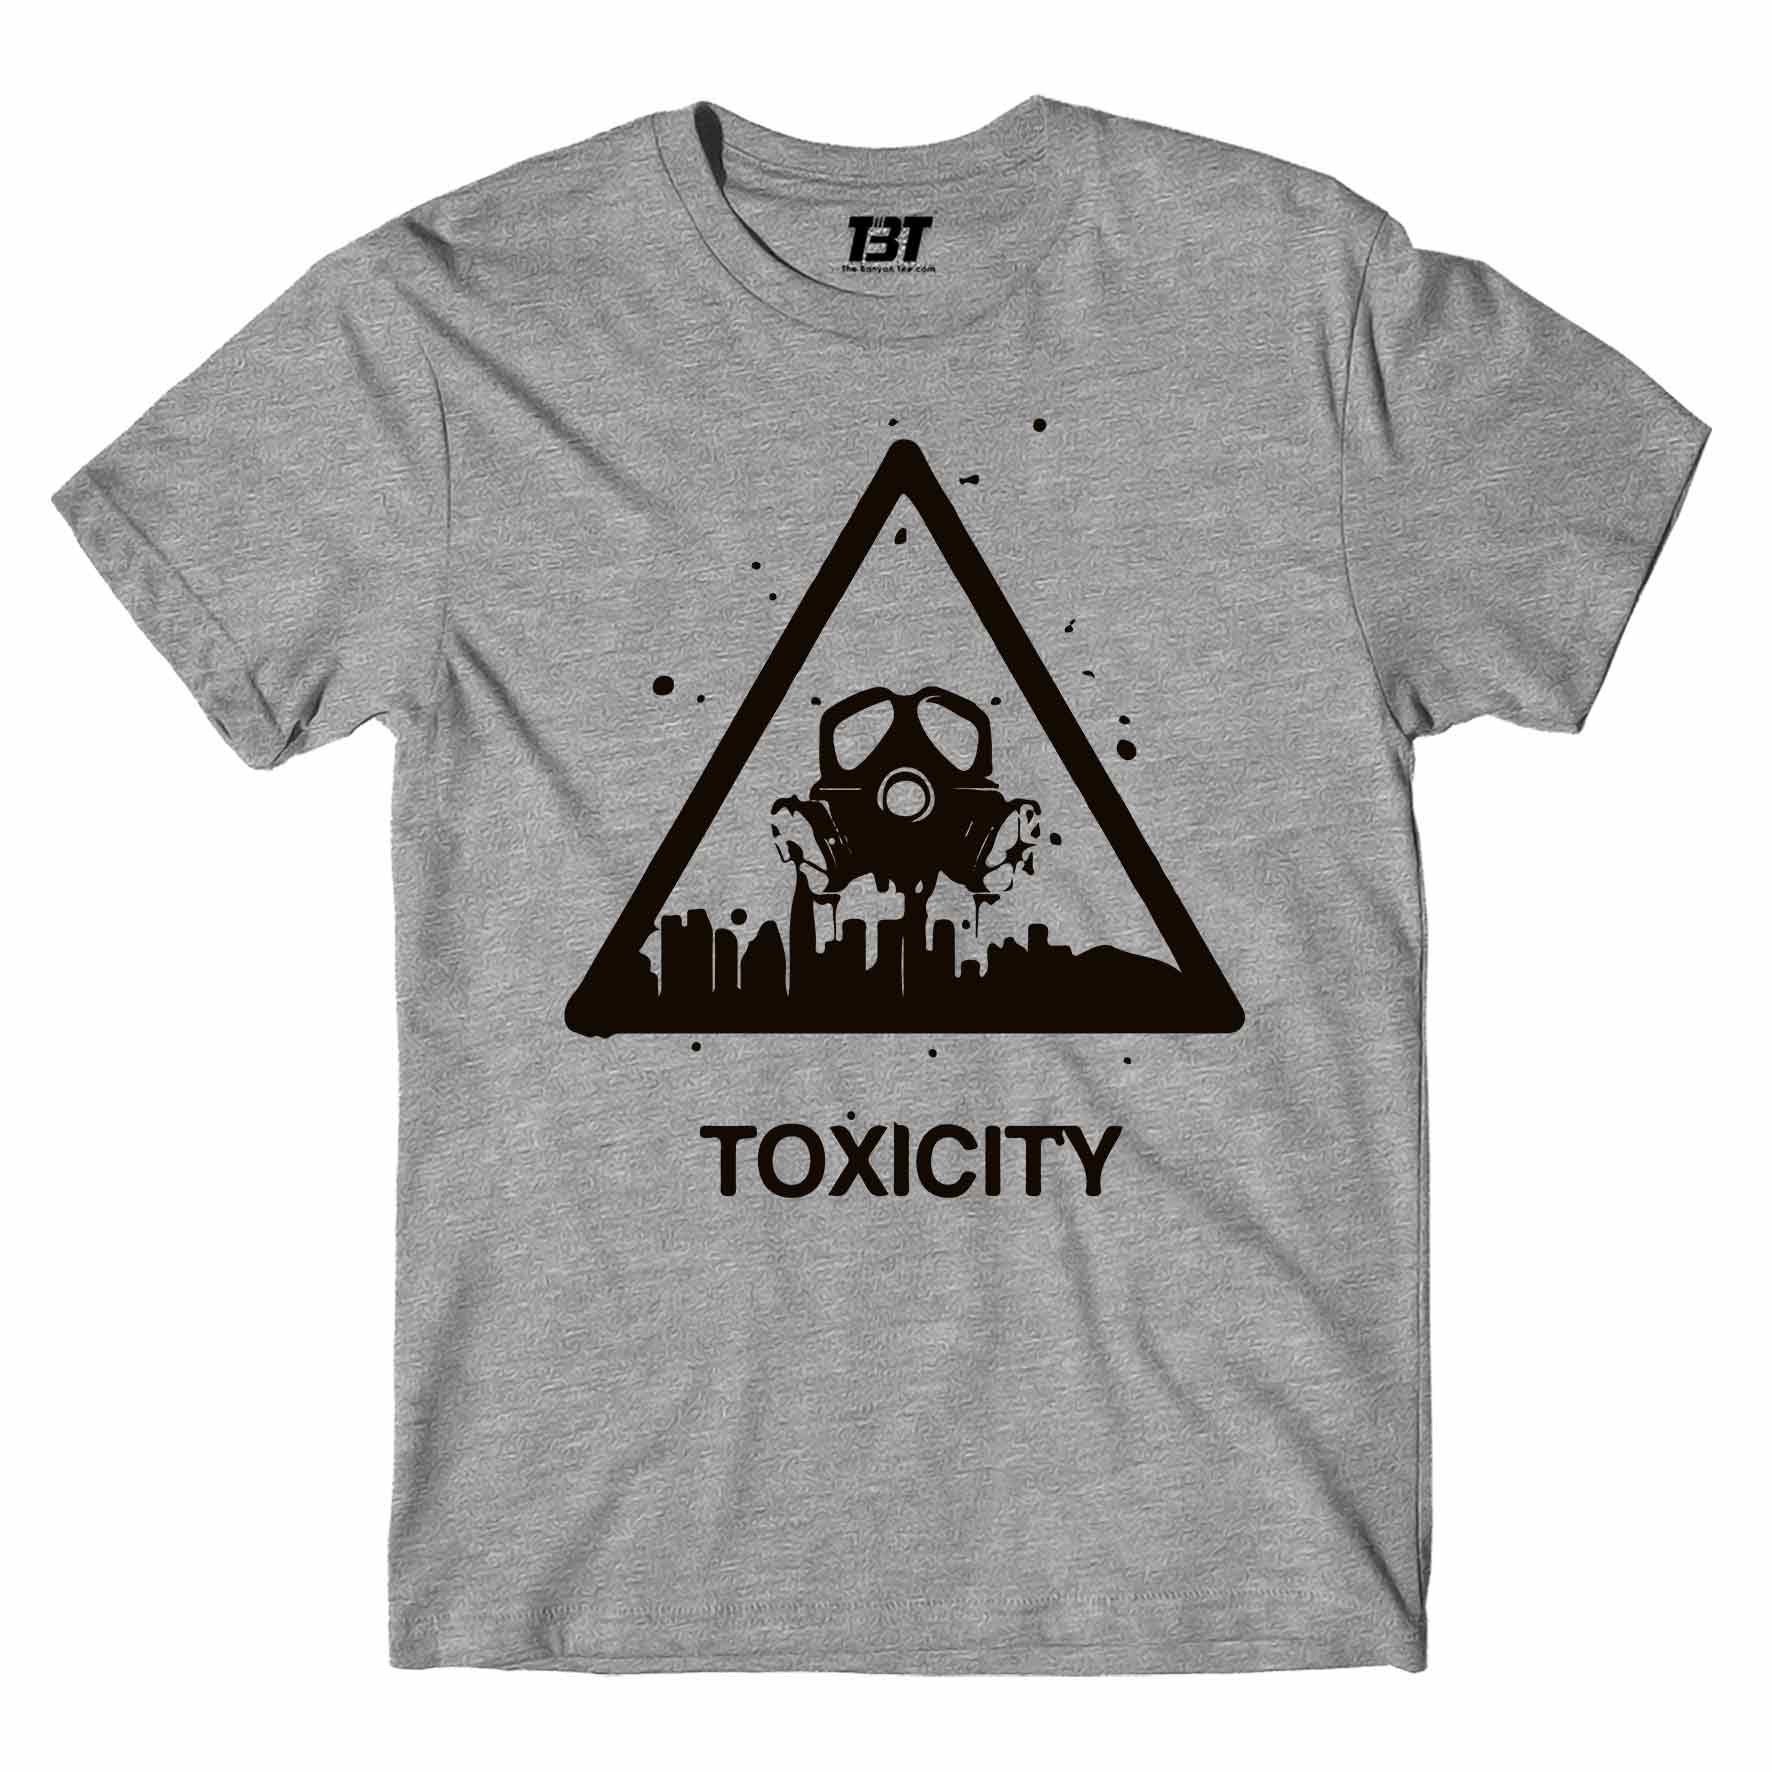 system of a down toxicity t-shirt music band buy online usa united states the banyan tee tbt men women girls boys unisex gray